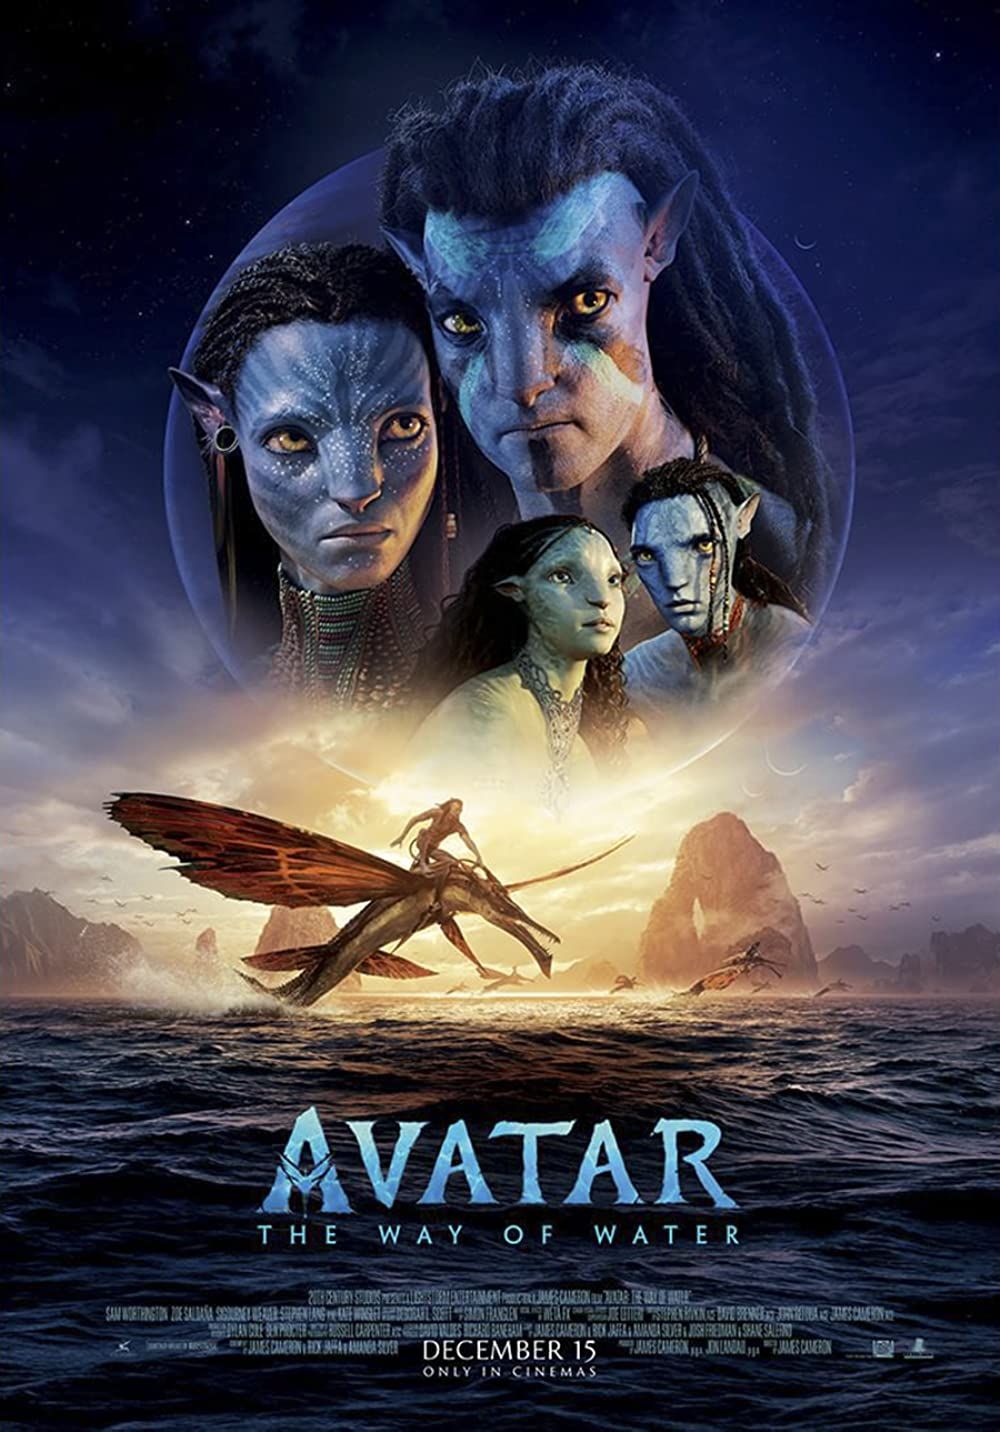 Where Can I Watch Avatar: The Last Airbender in 2022?